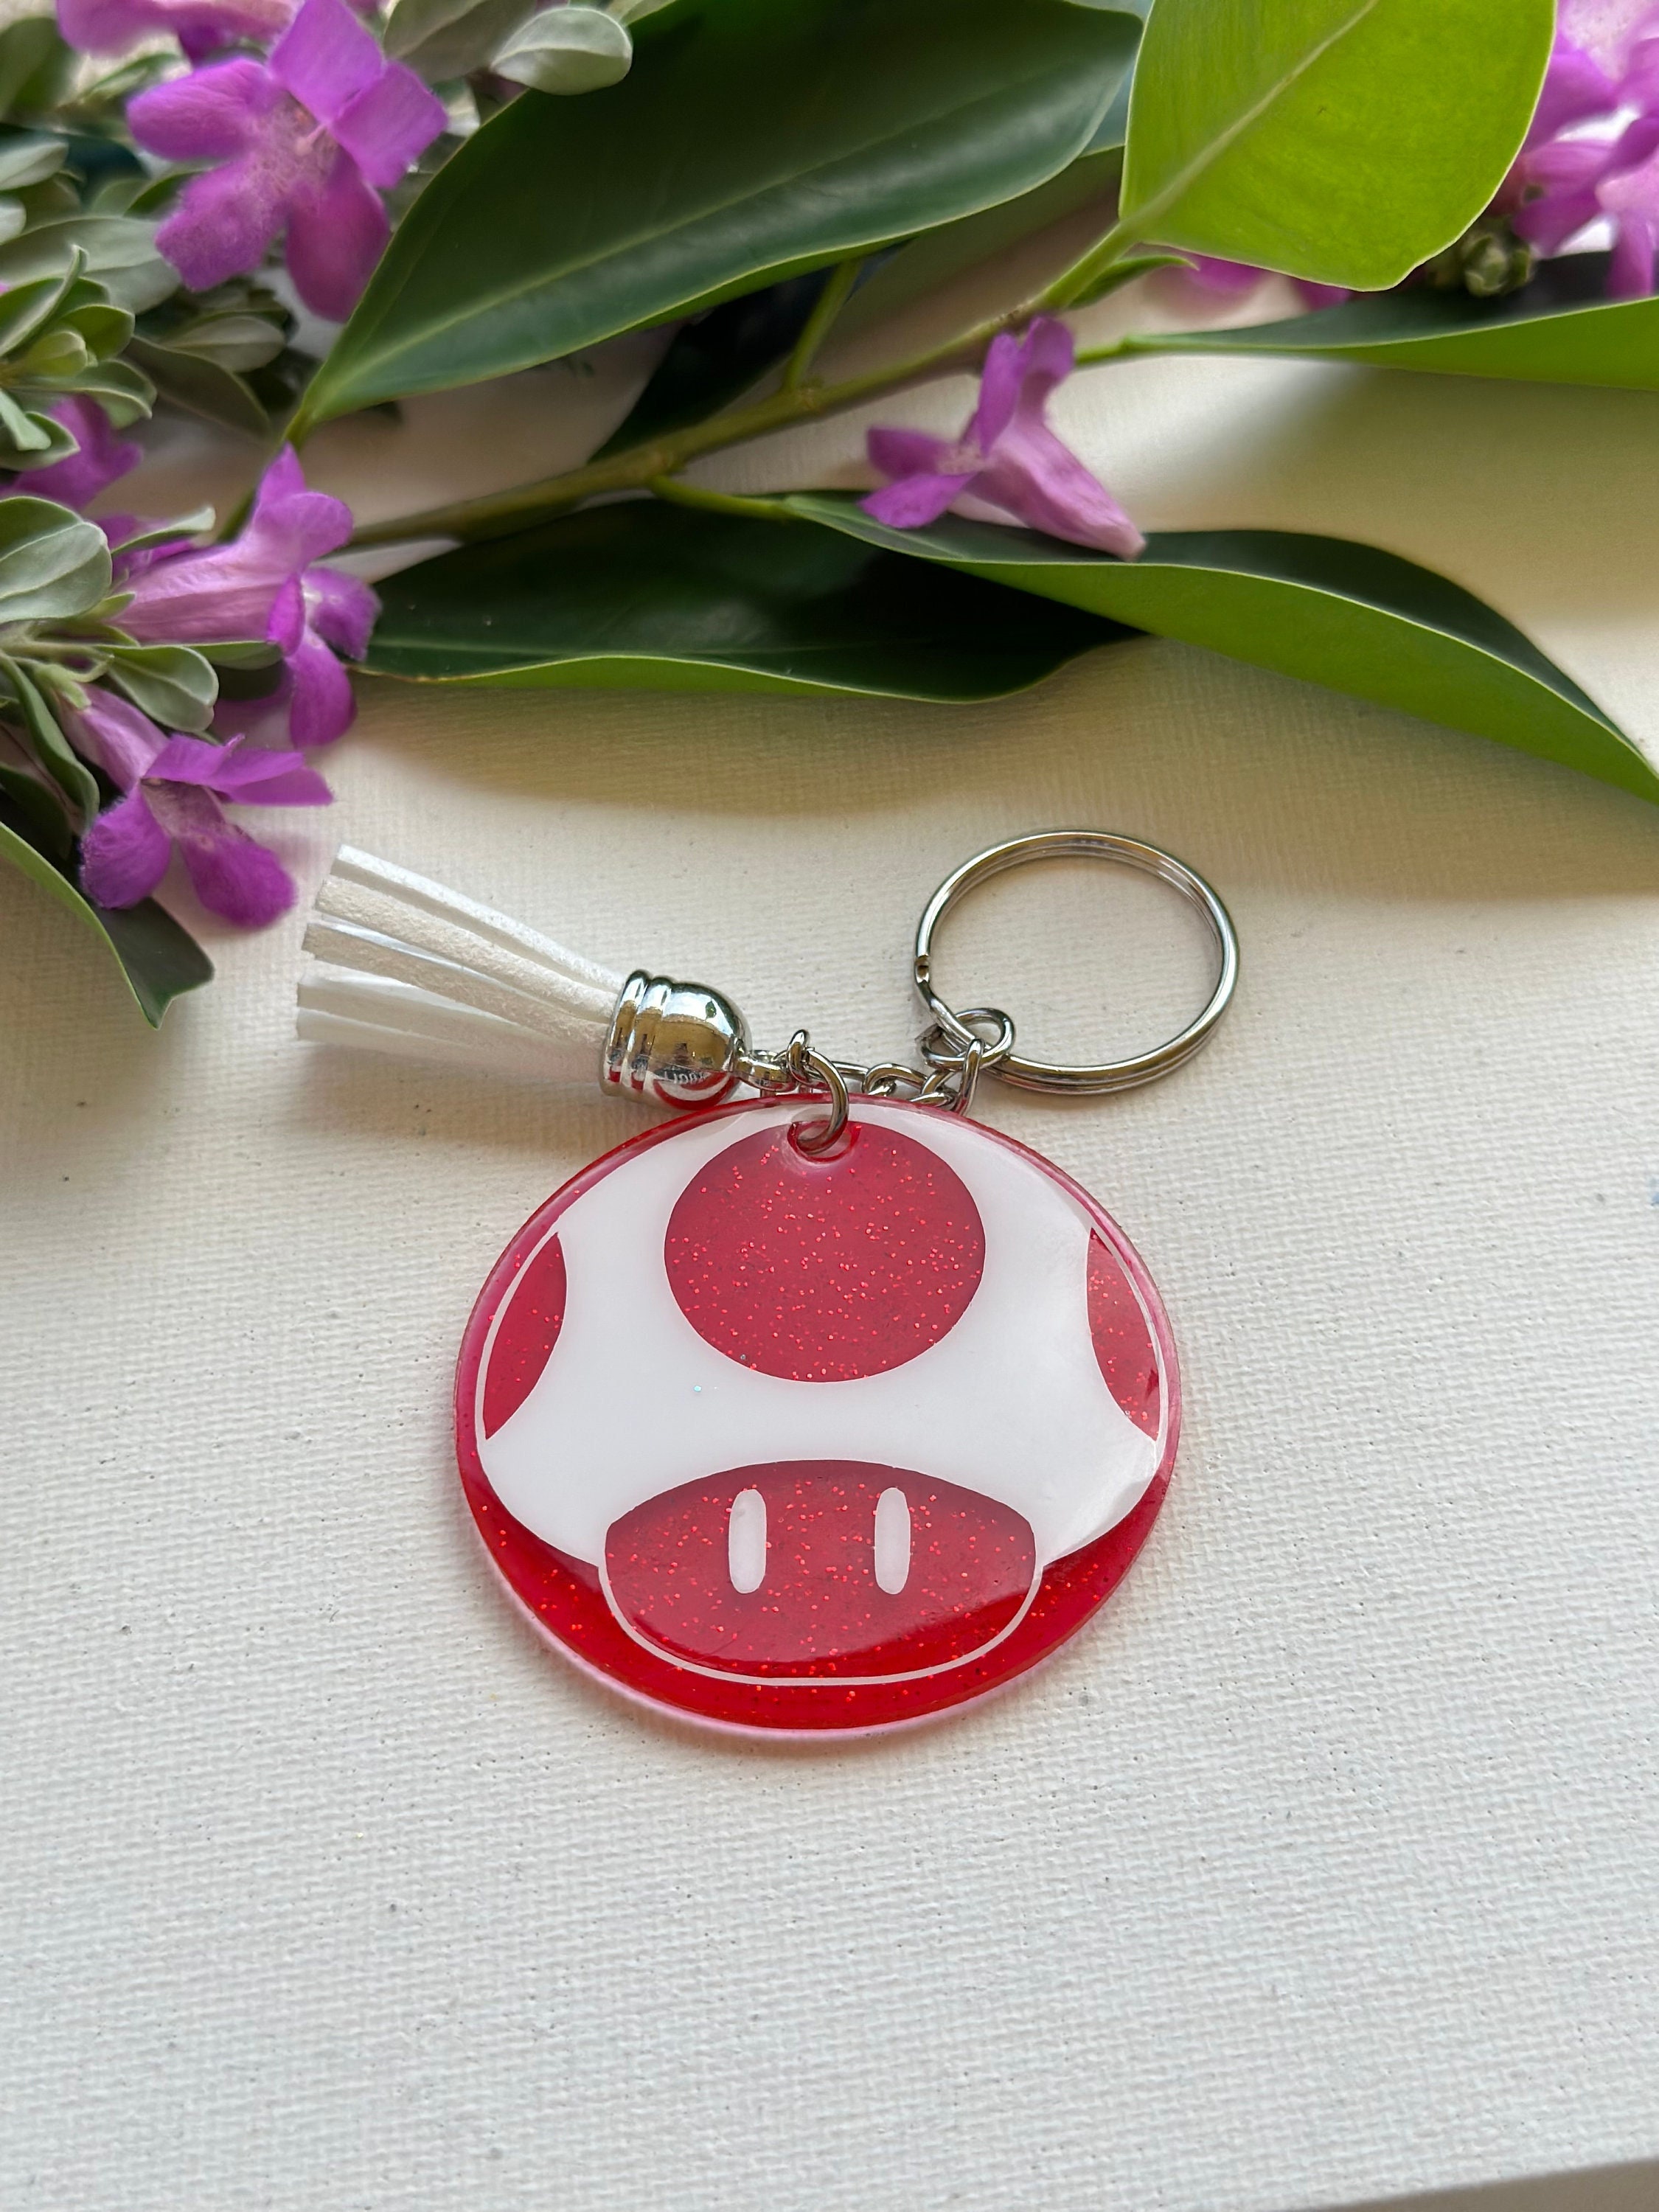 Super Mario Brothers Shrinky Dink Necklace for Video Games Day!